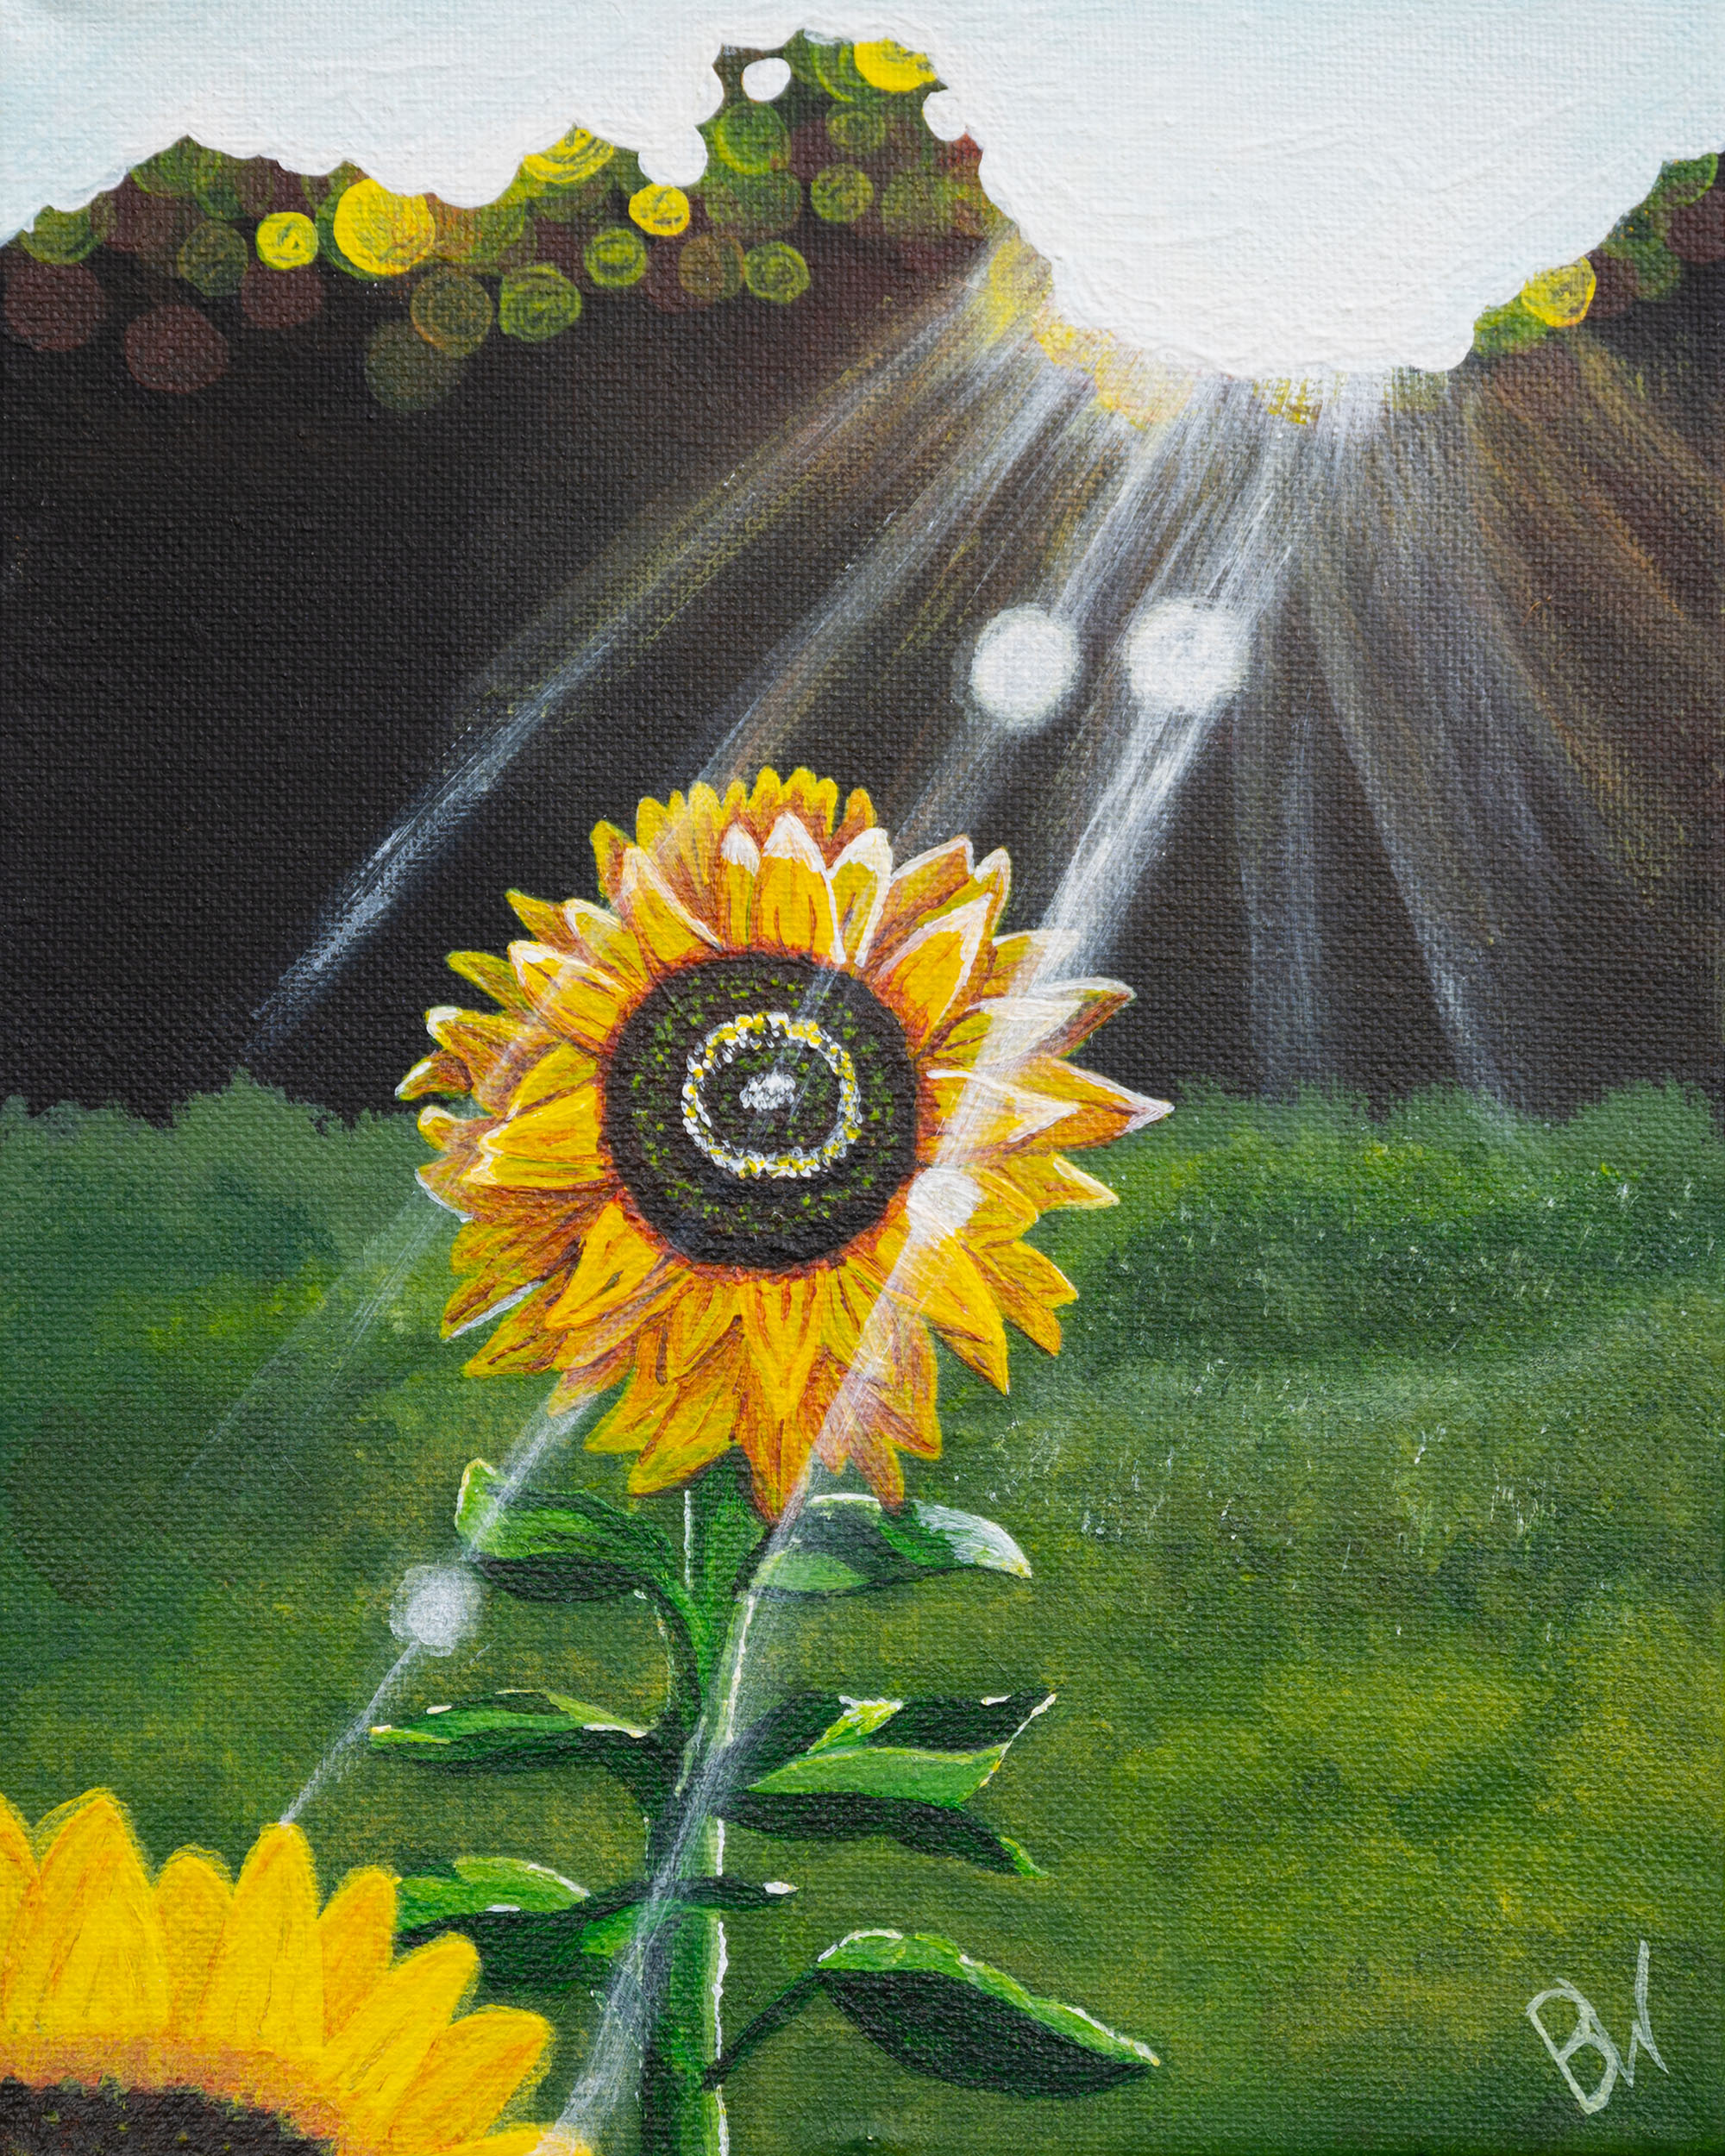 A Sunbeam Over Sunflower experience project by Yaymaker